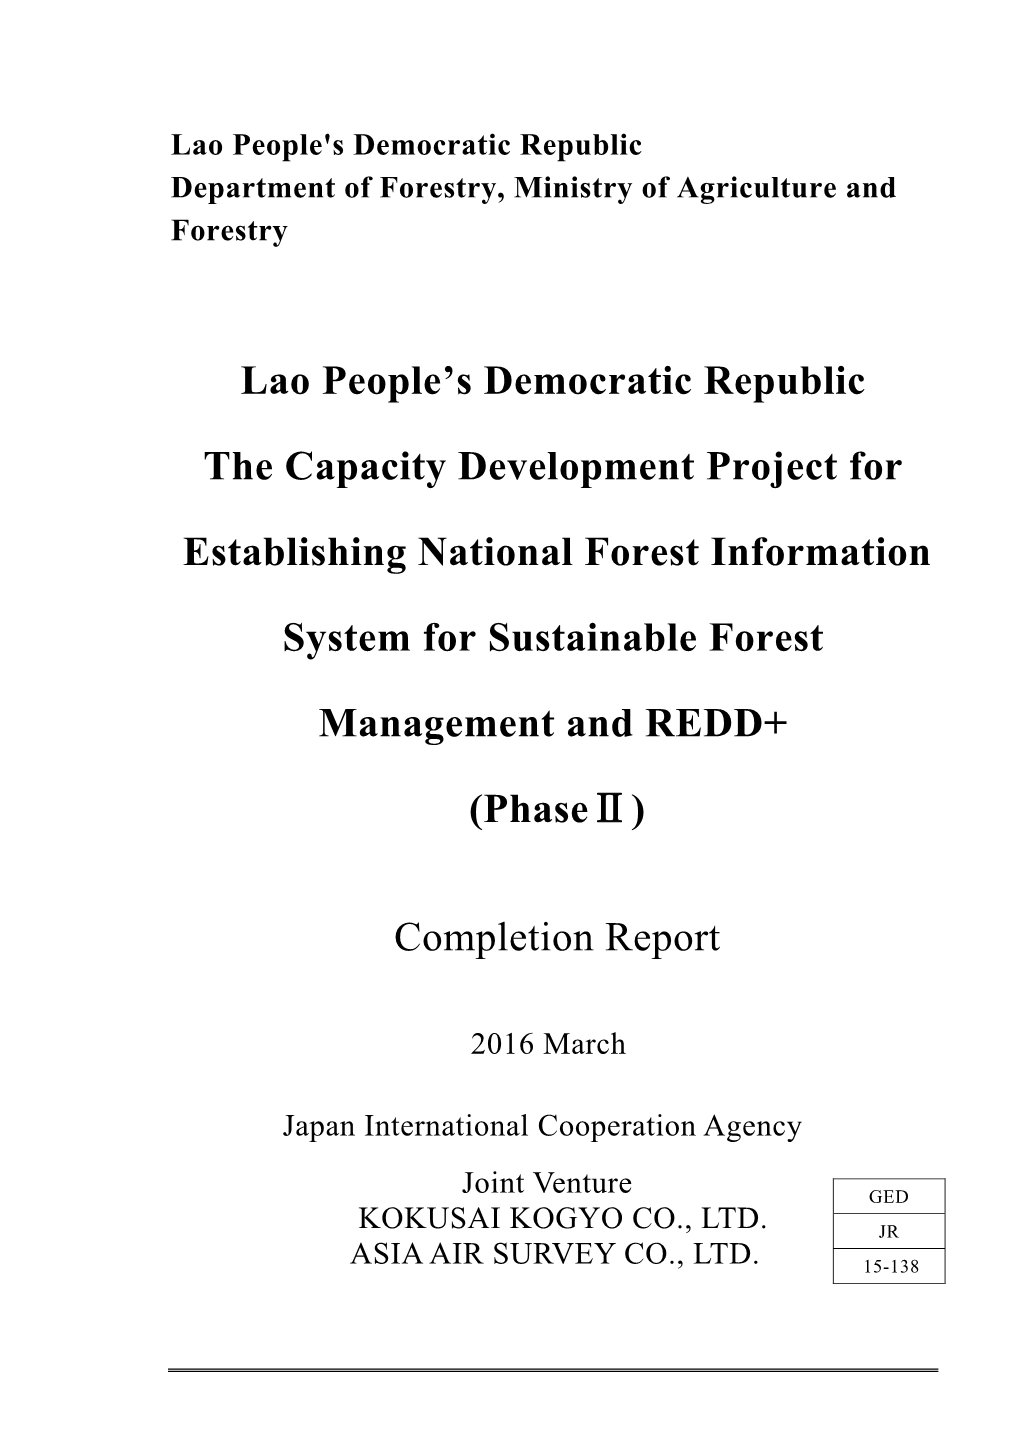 Lao People's Democratic Republic the Capacity Development Project for Establishing National Forest Information System for Sust